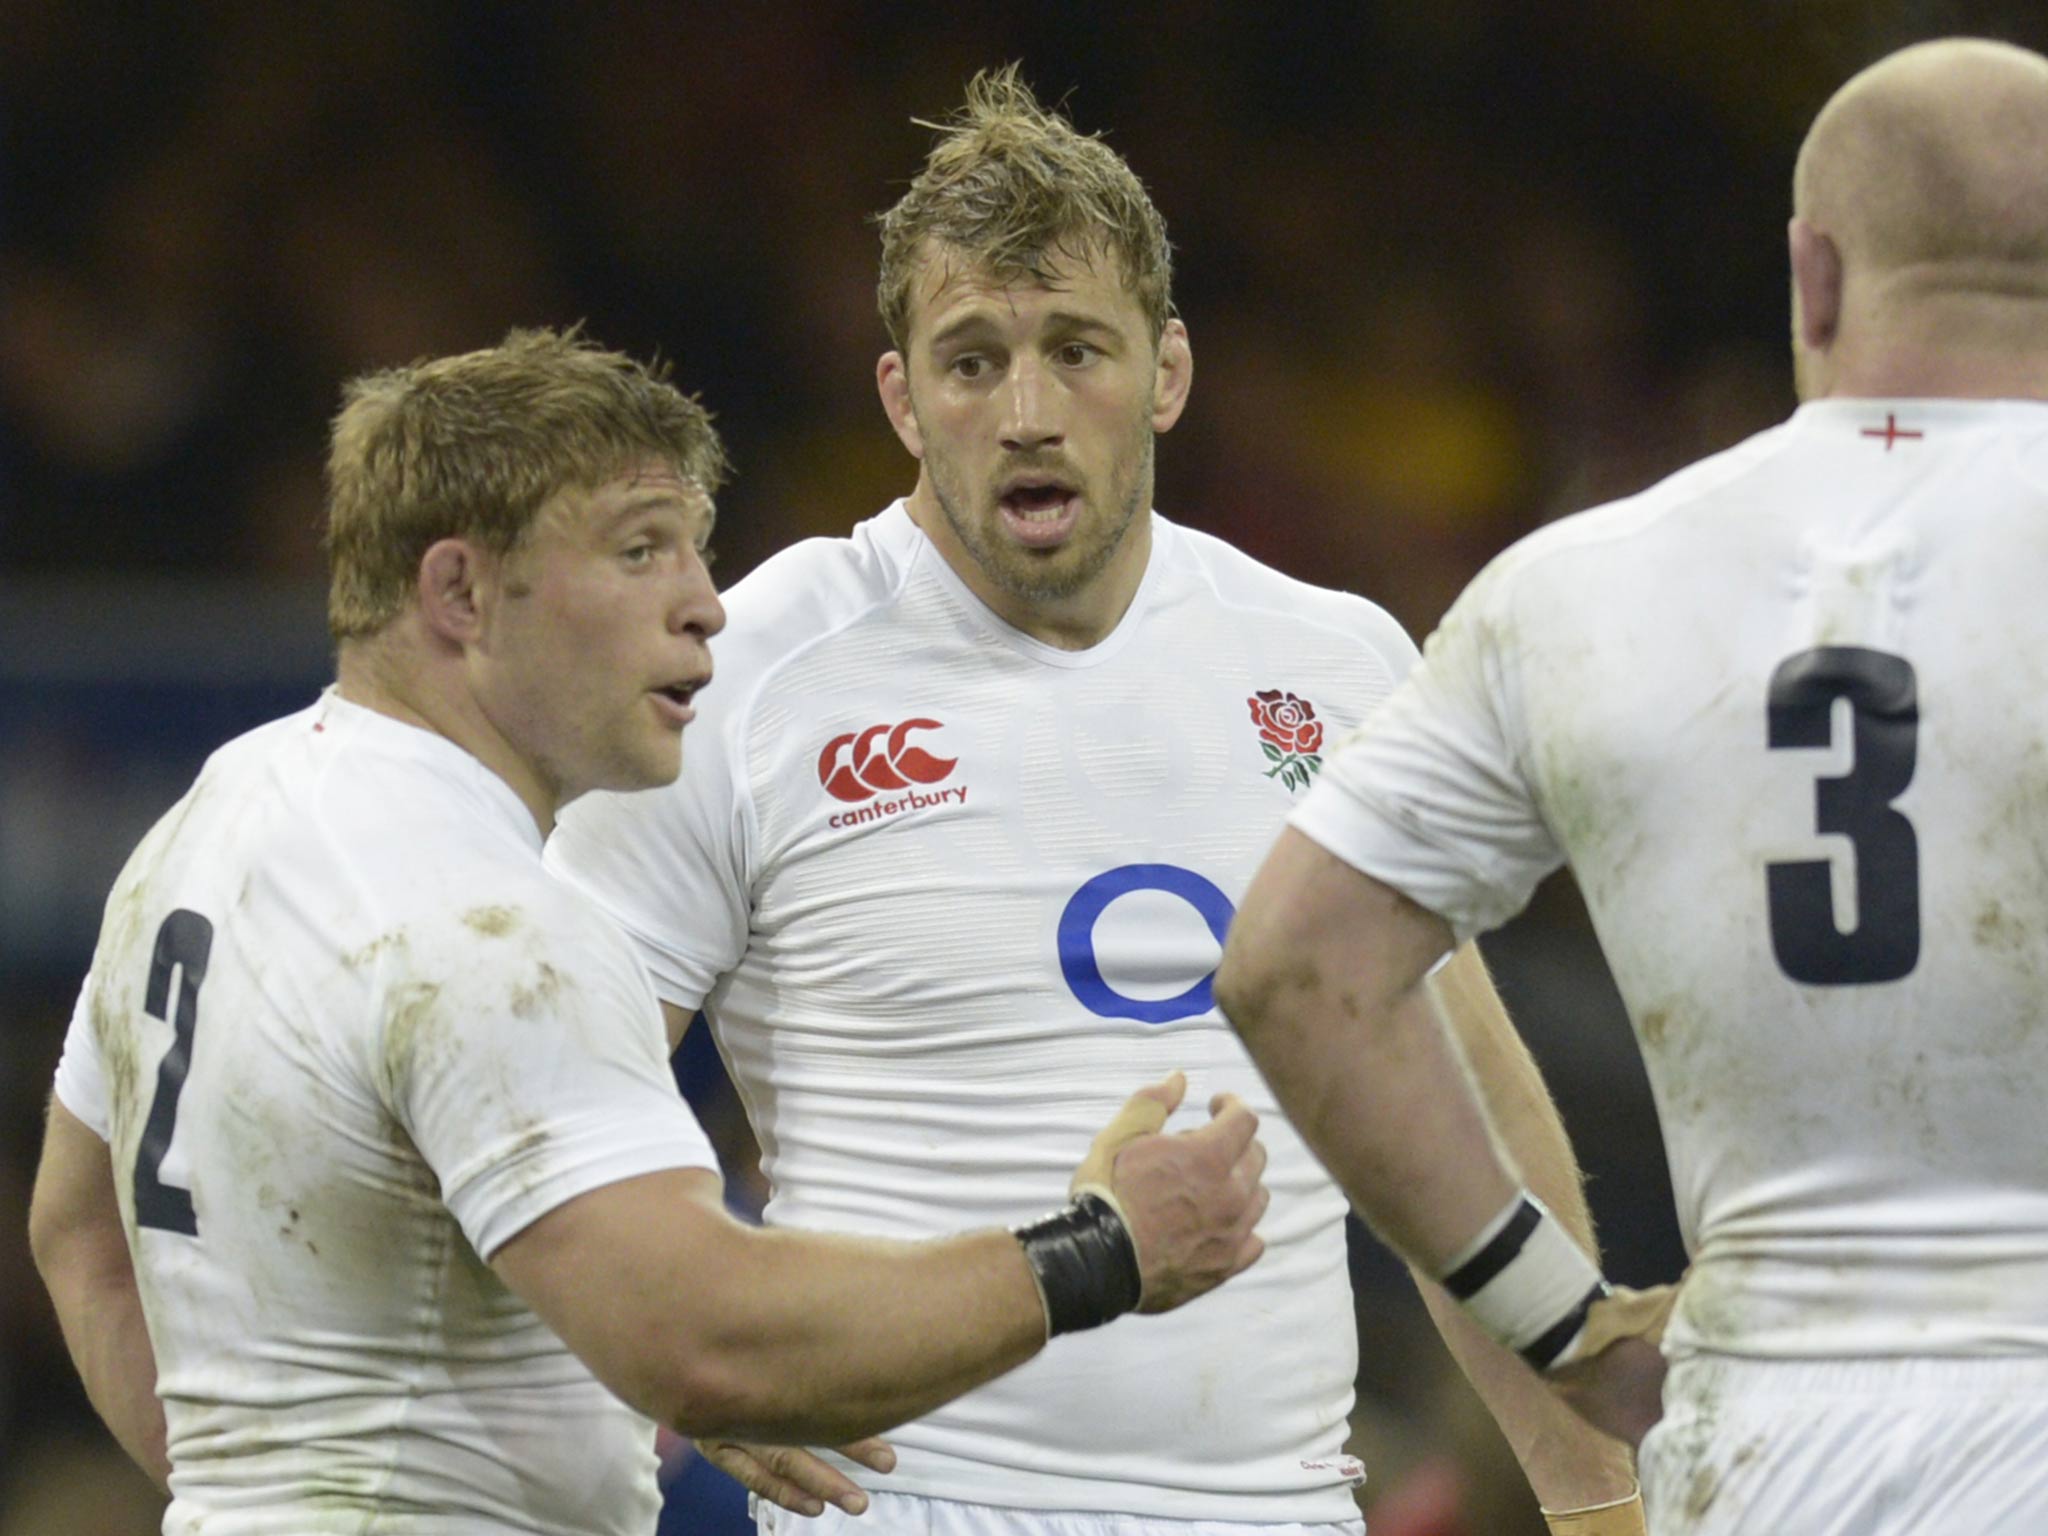 England's flanker Chris Robshaw (C) talks with England's hooker Tom Youngs (L) and England's prop Dan Cole